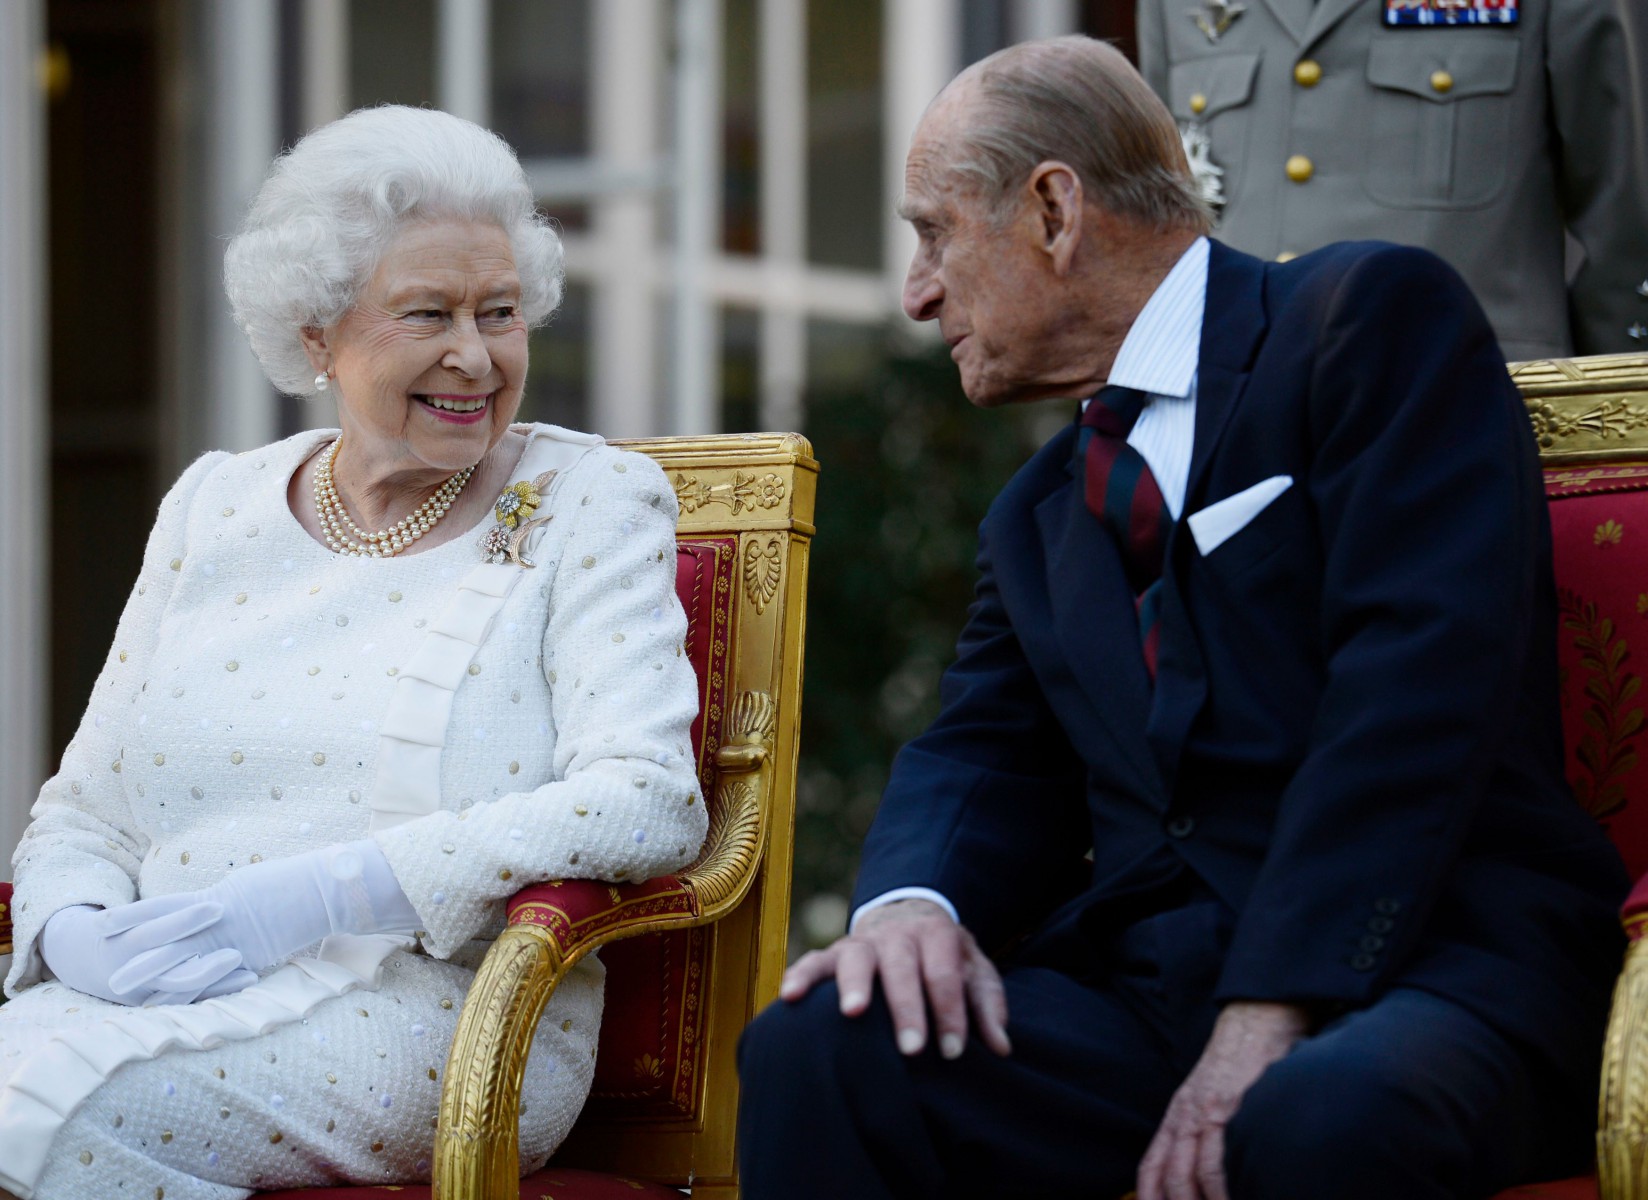 The Queen likes to stay up with Prince Philip each year to ring in the New Year at midnight